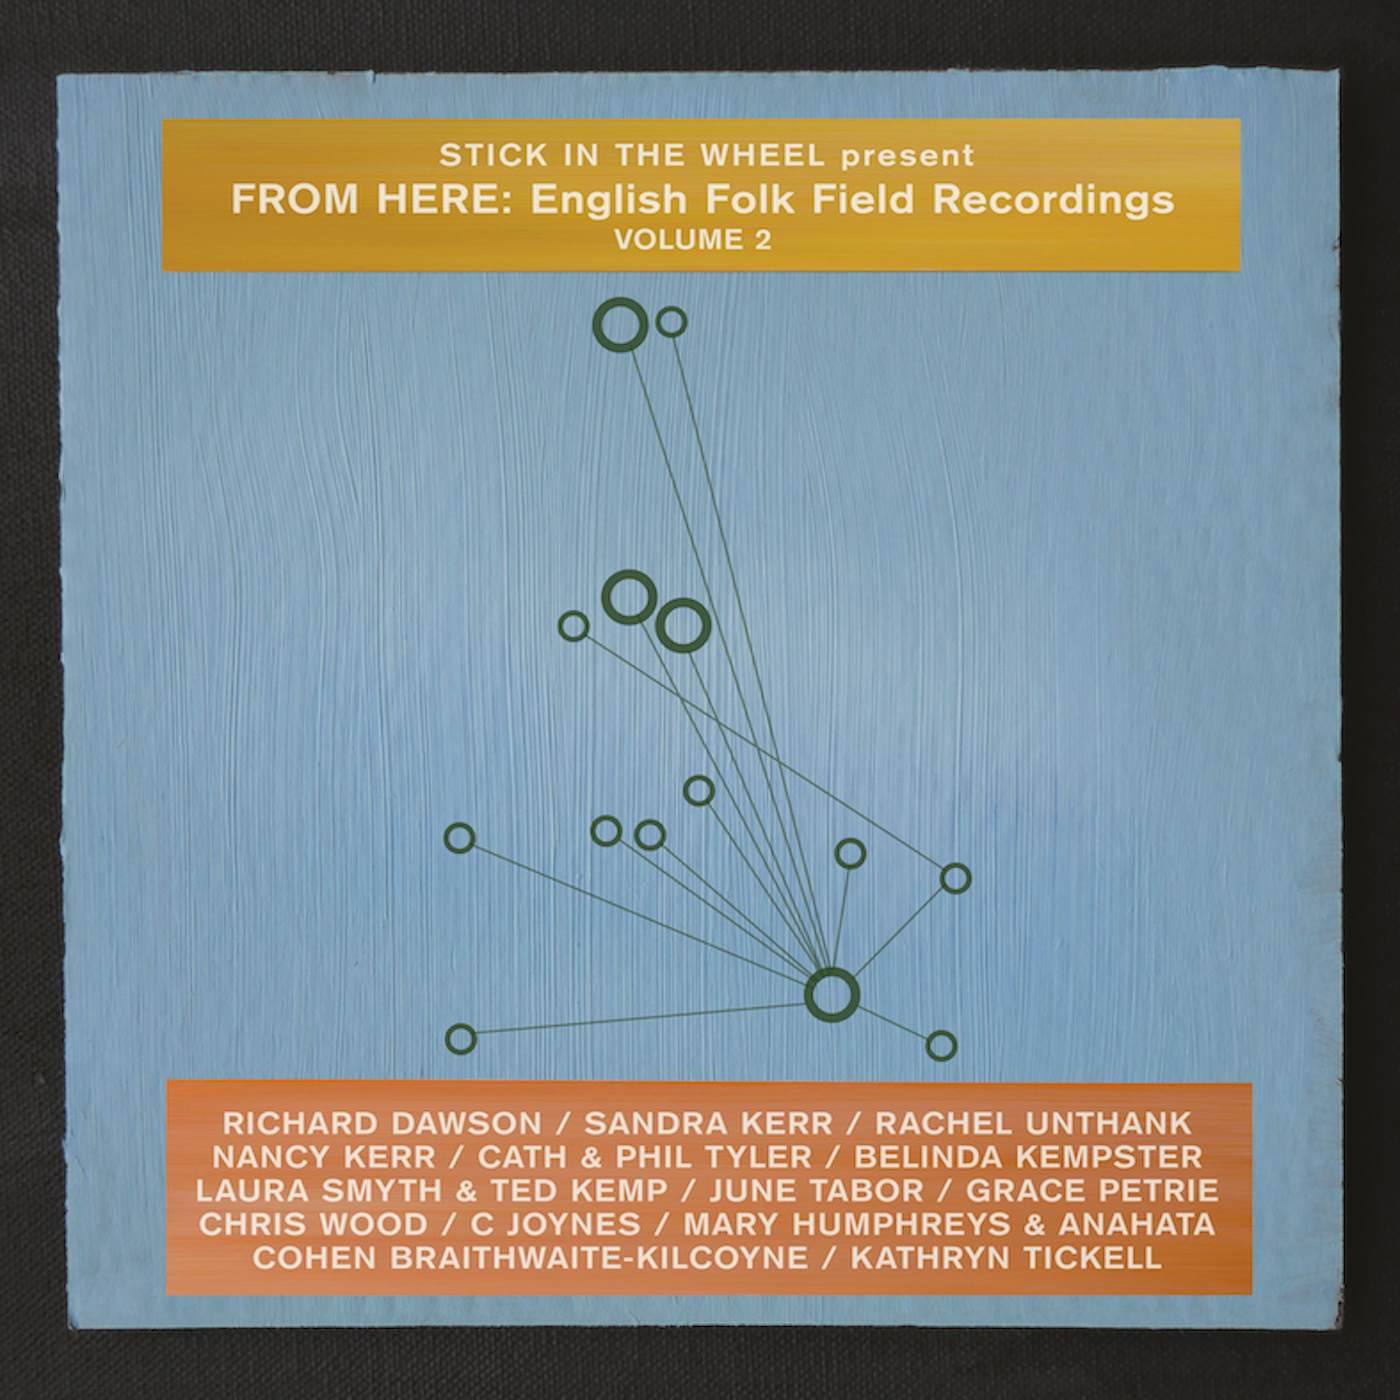 Stick In The Wheel Presents FROM HERE: ENGLISH FOLK FIELD RECORDINGS VOL. 2 Vinyl Record